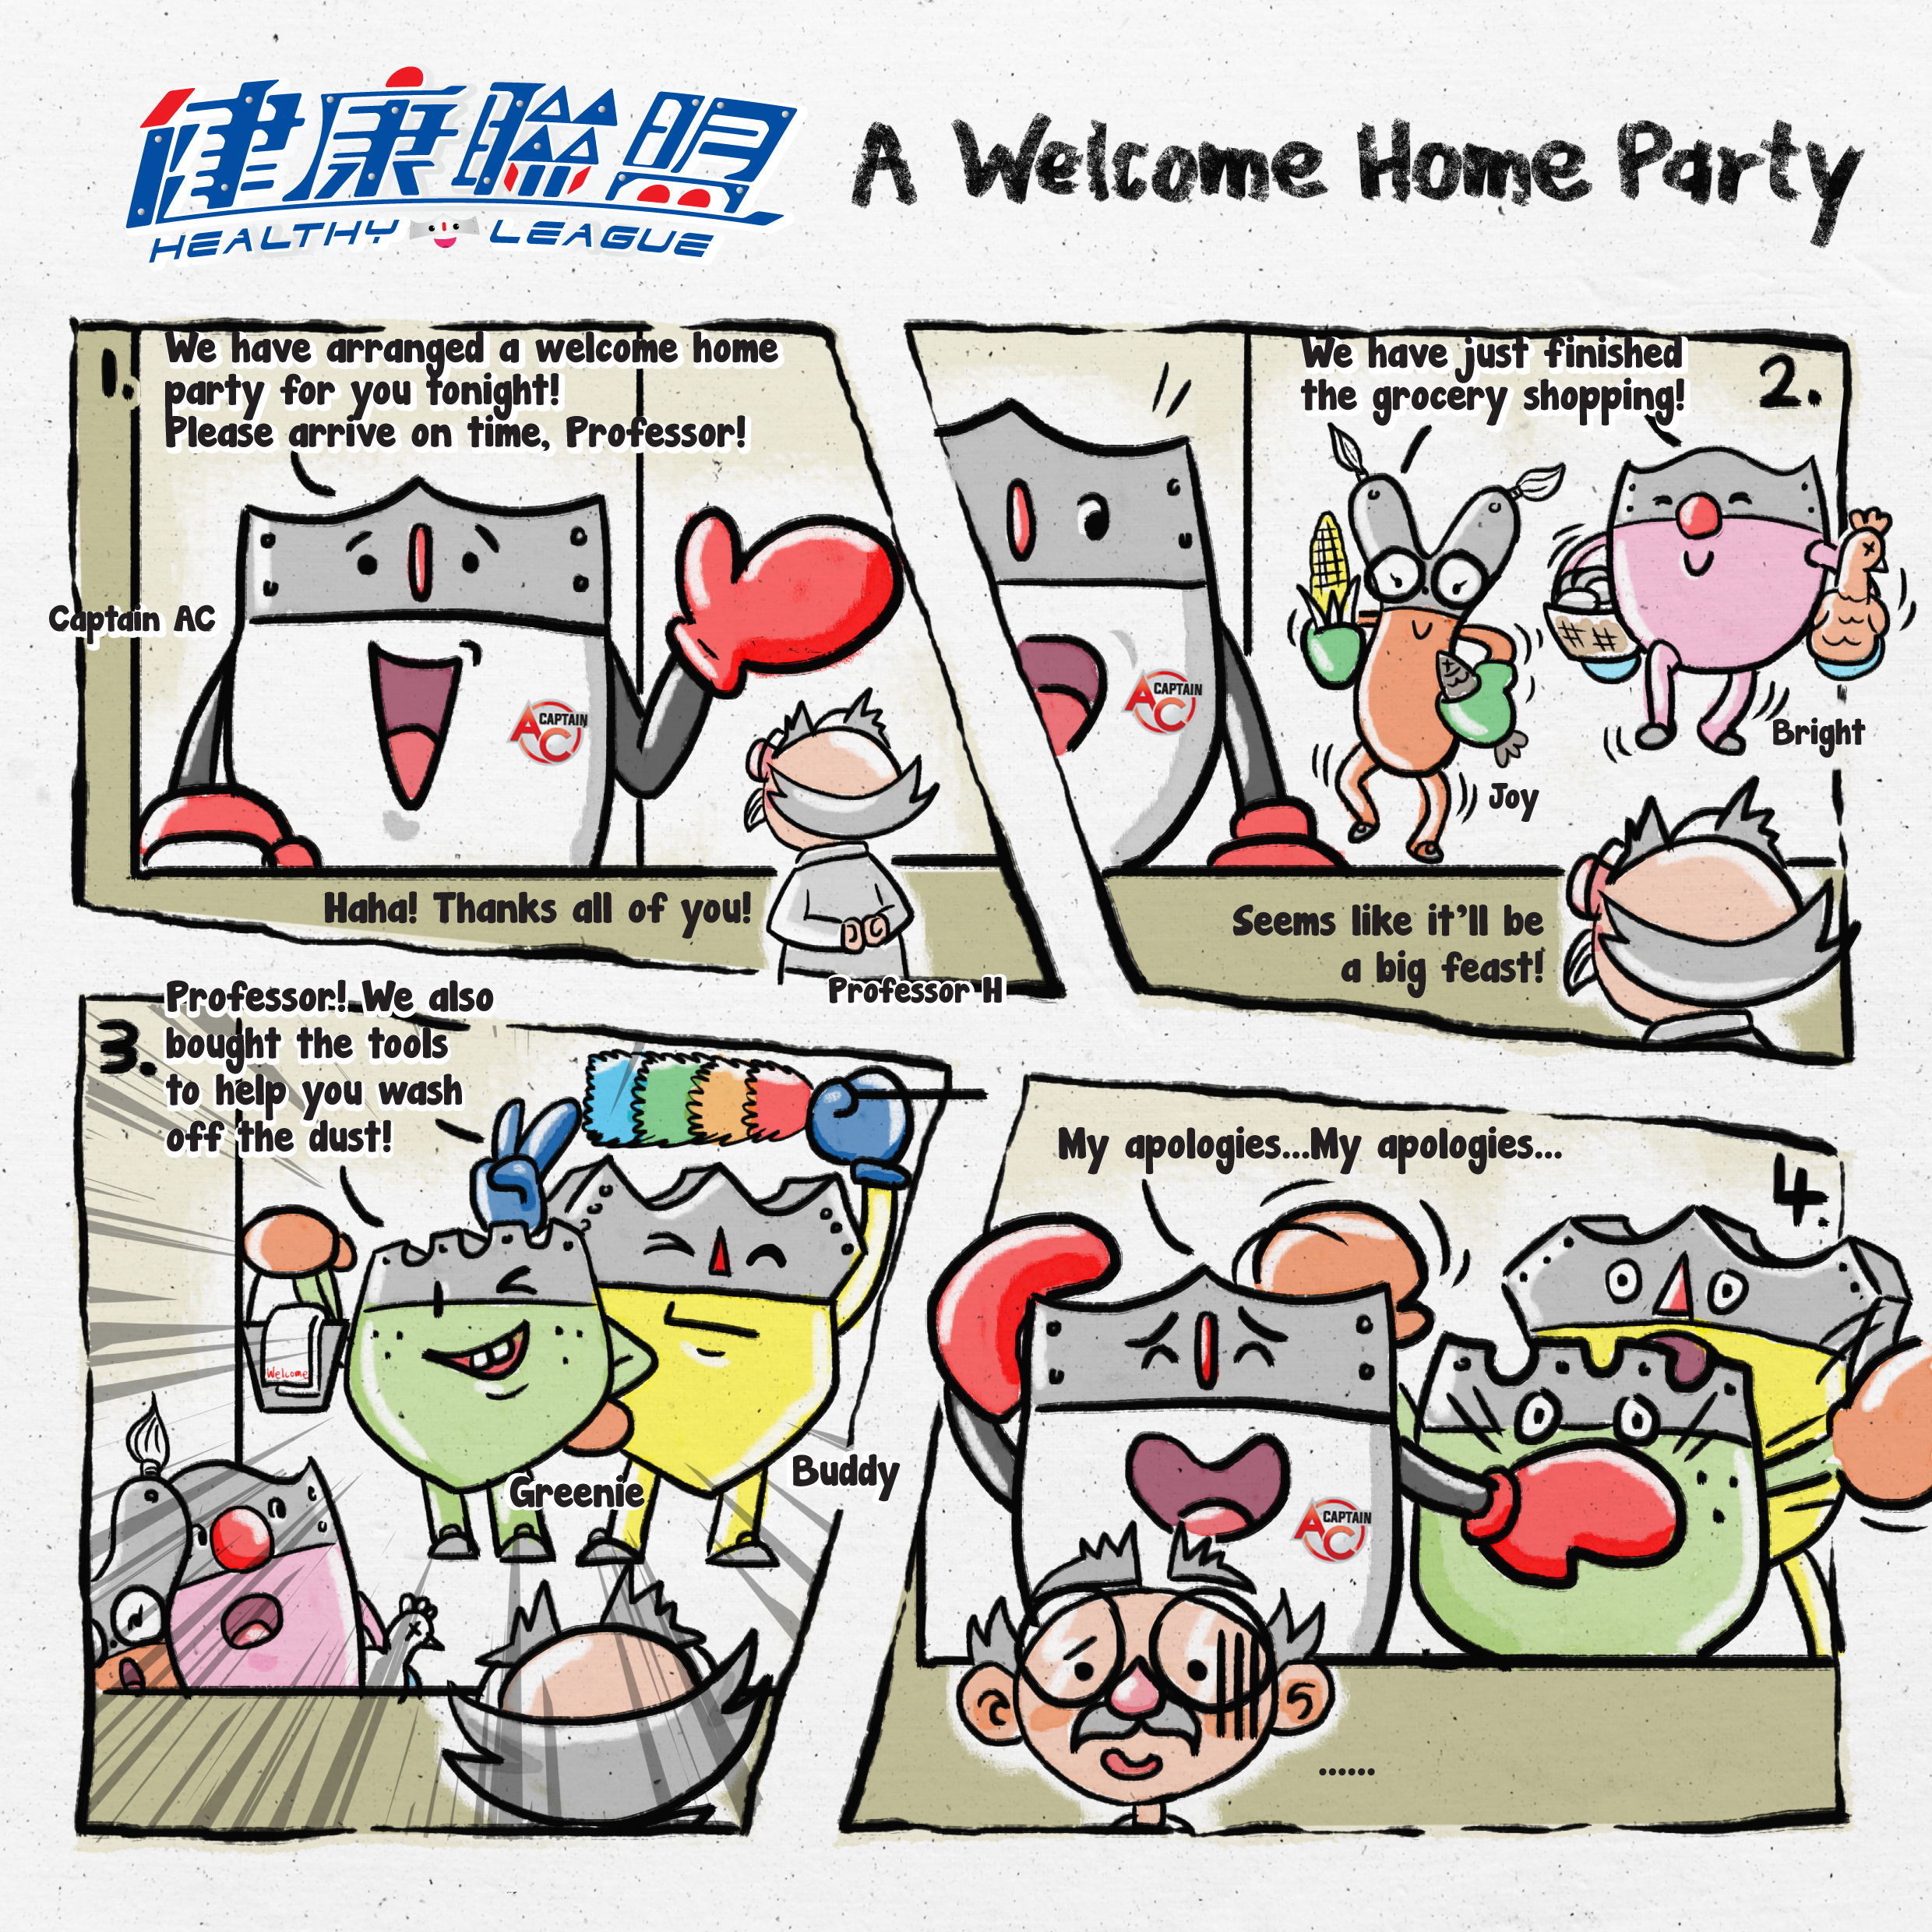 A WELCOME HOME PARTY